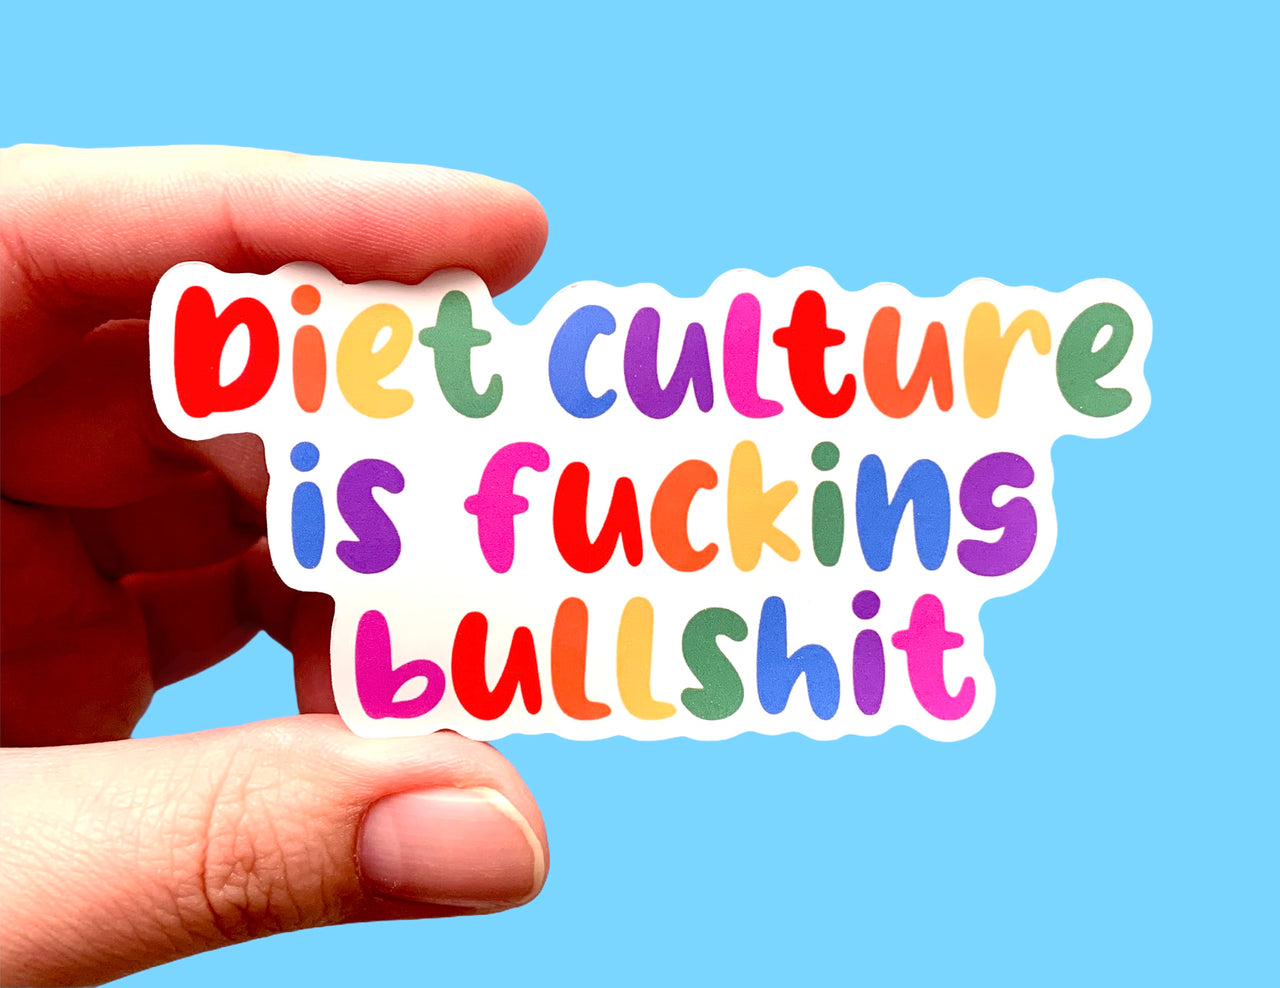 Diet culture is fucking bullshit (pack of 3 or 5 stickers)